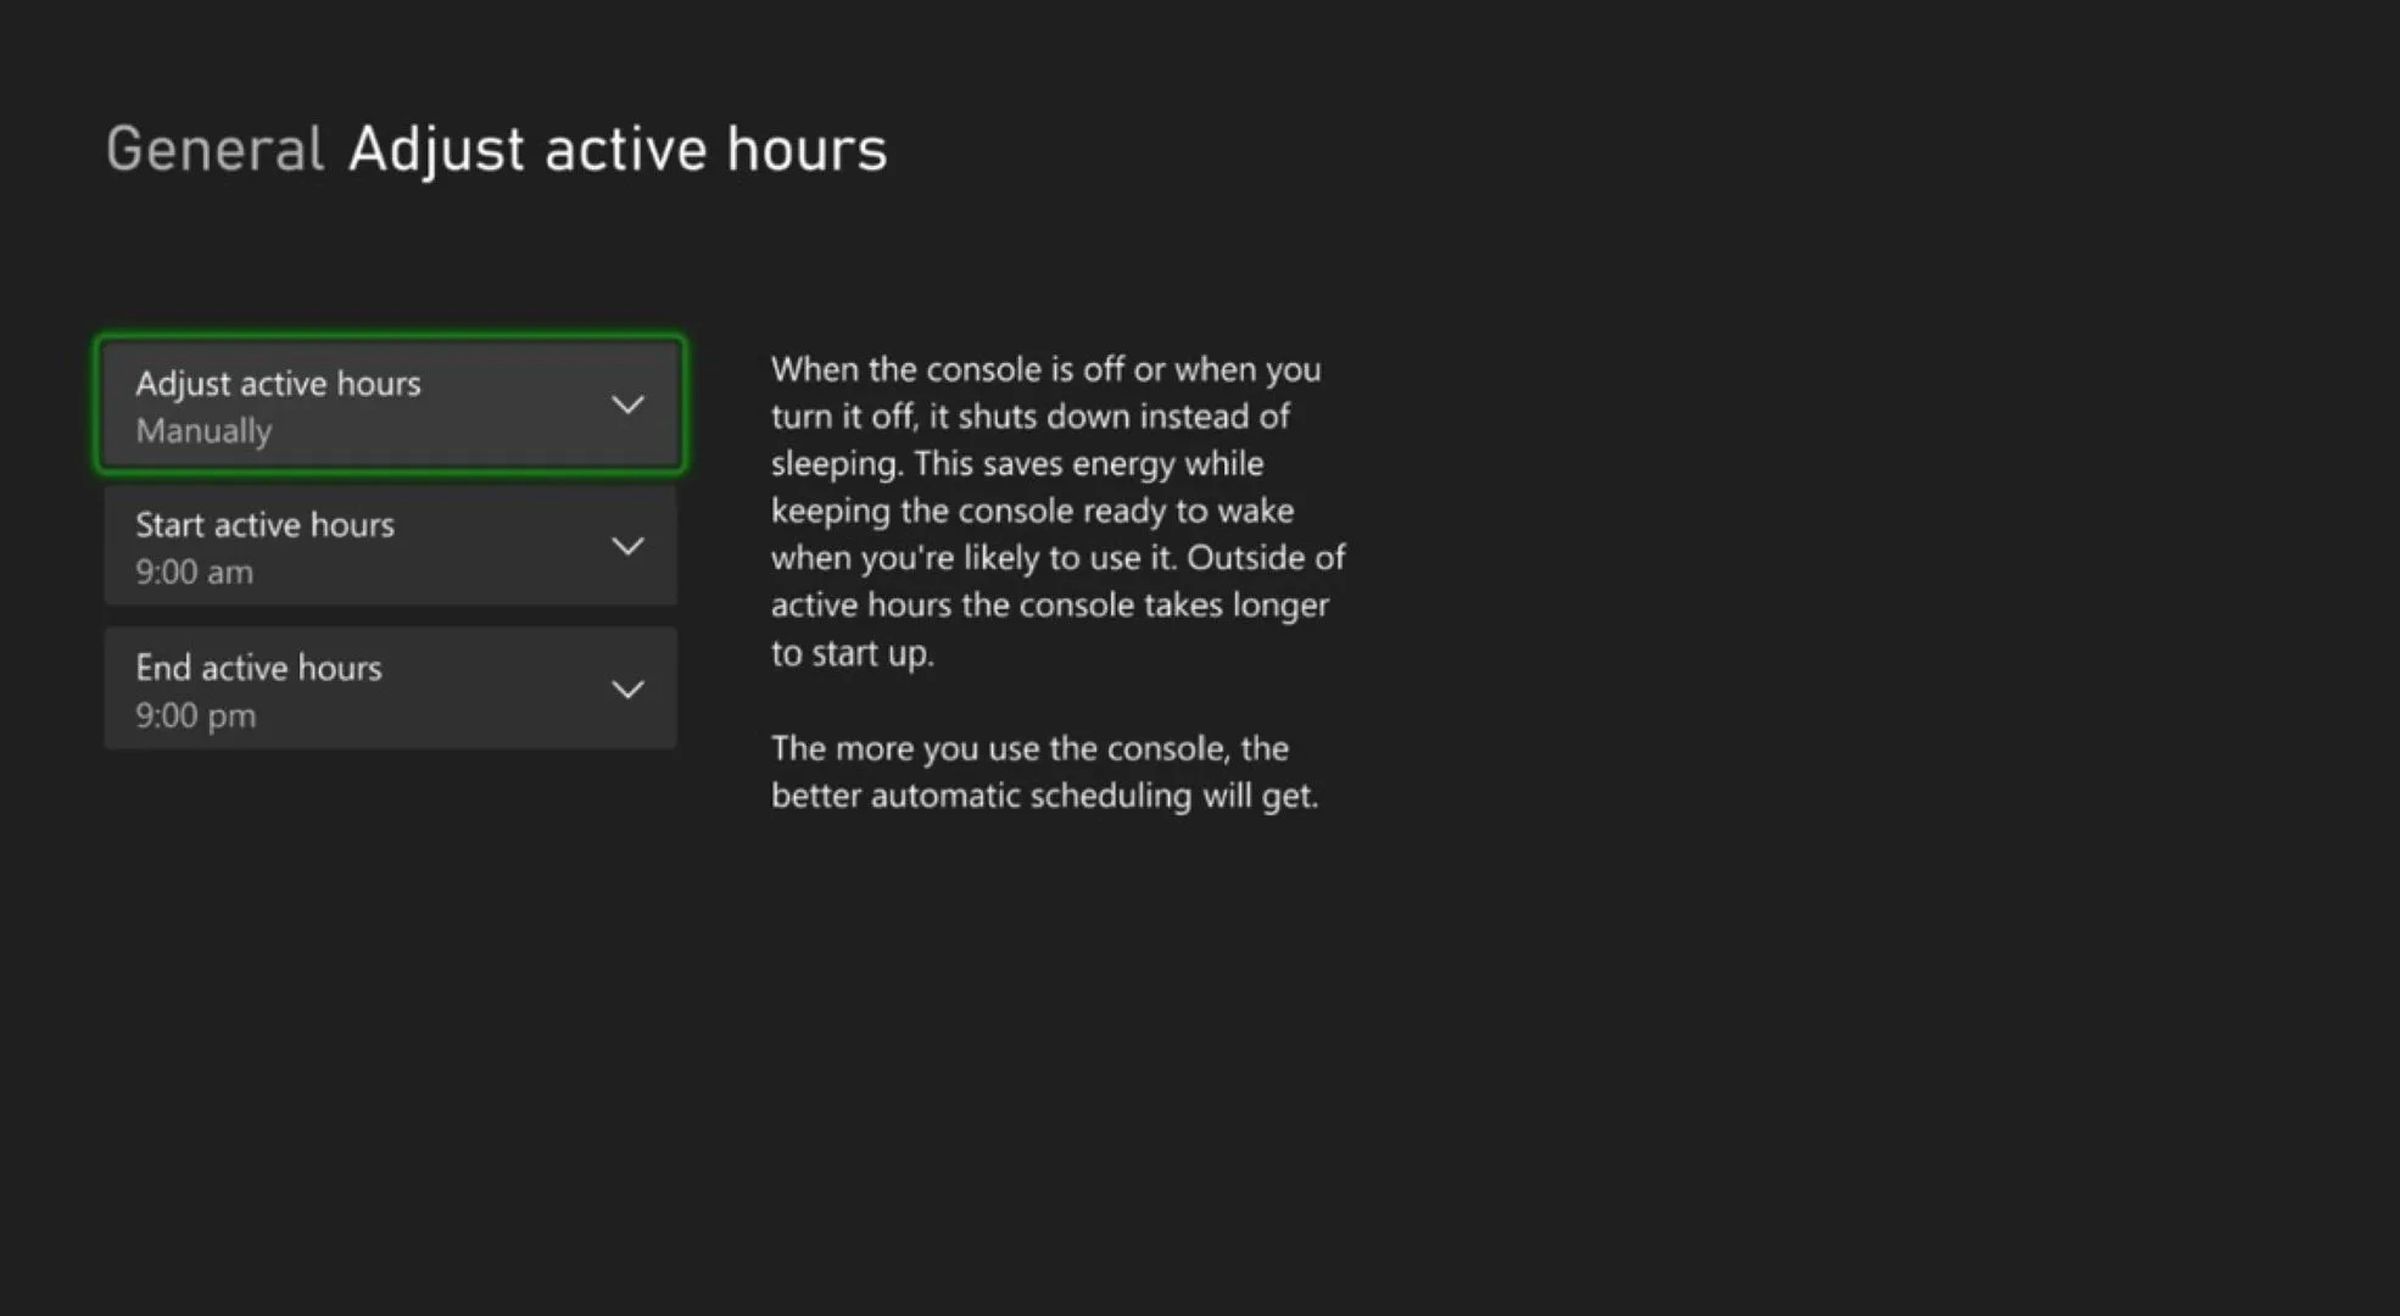 You can set the new active hours manually or let your Xbox pick the times for you depending on when you use the console.